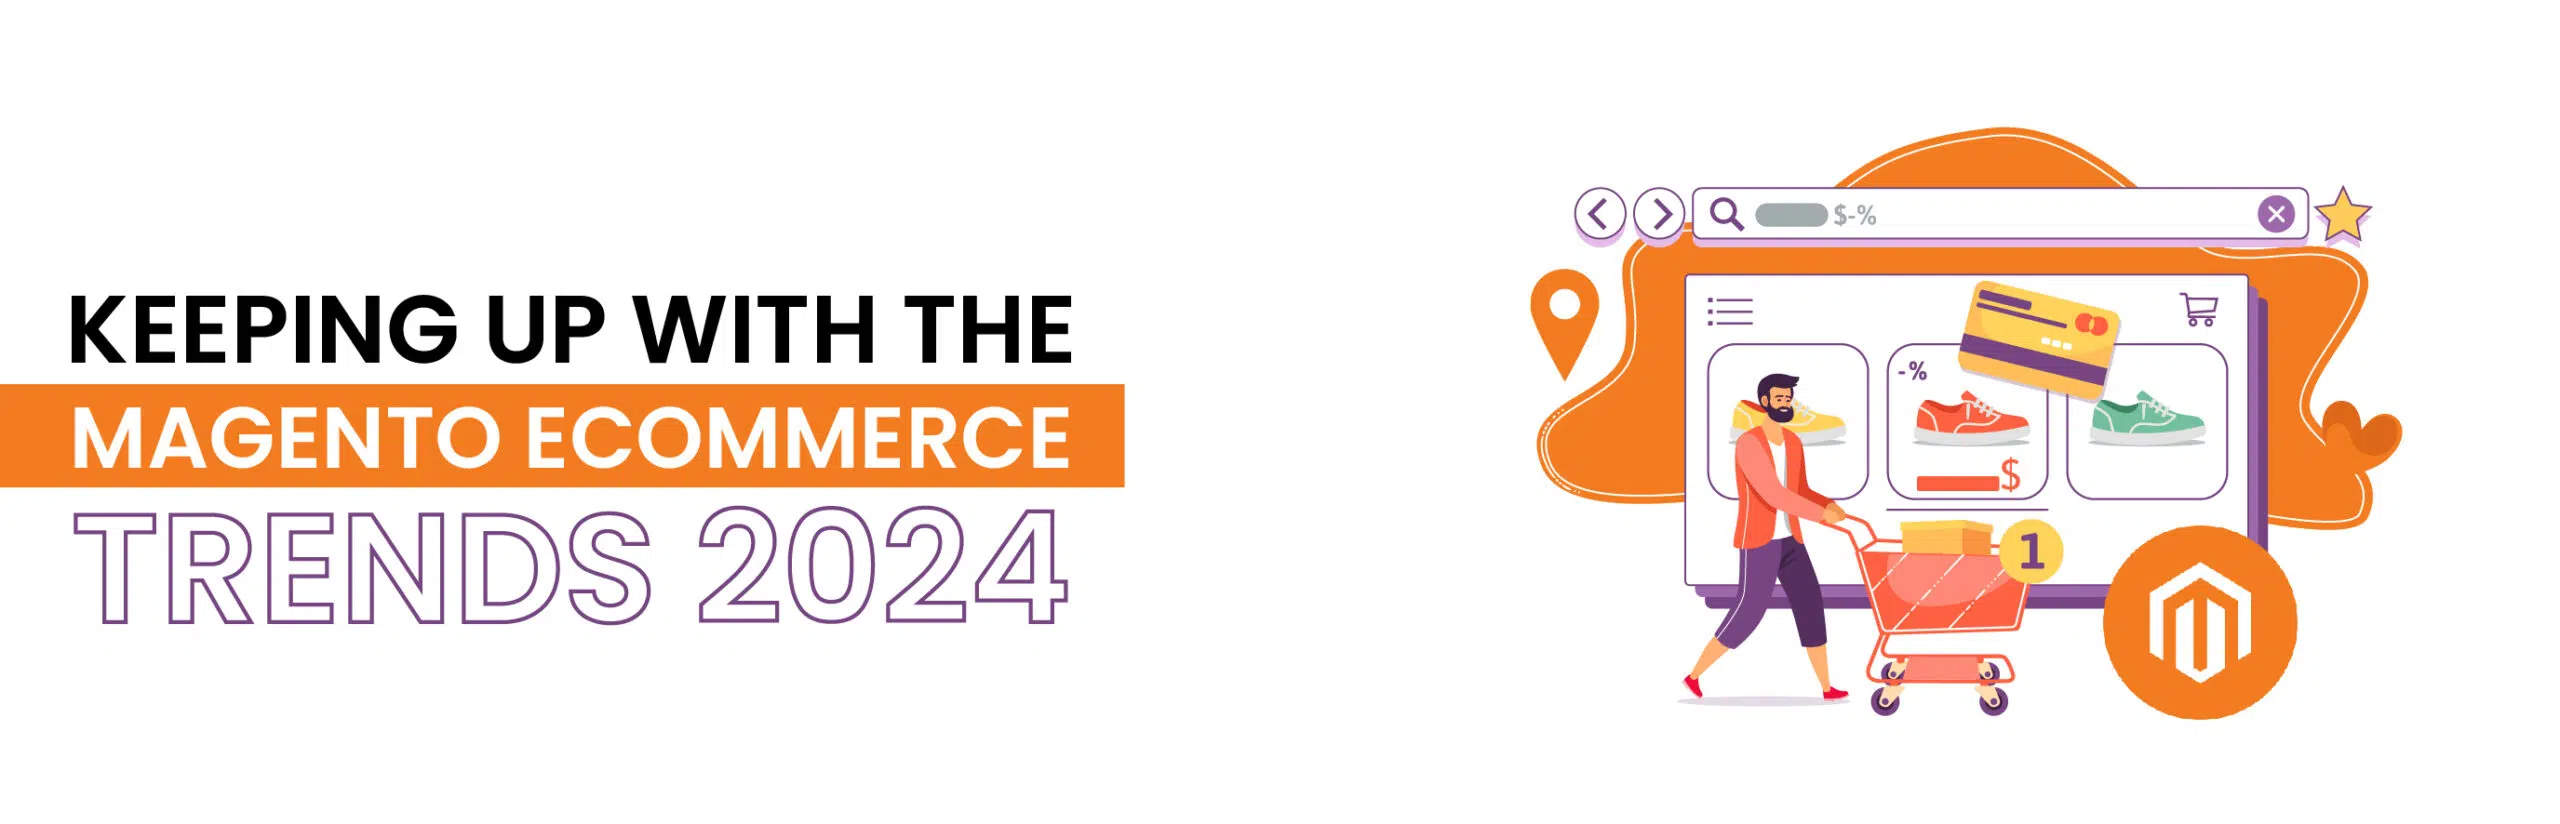 Keeping Up With the Magento eCommerce Trends 2024